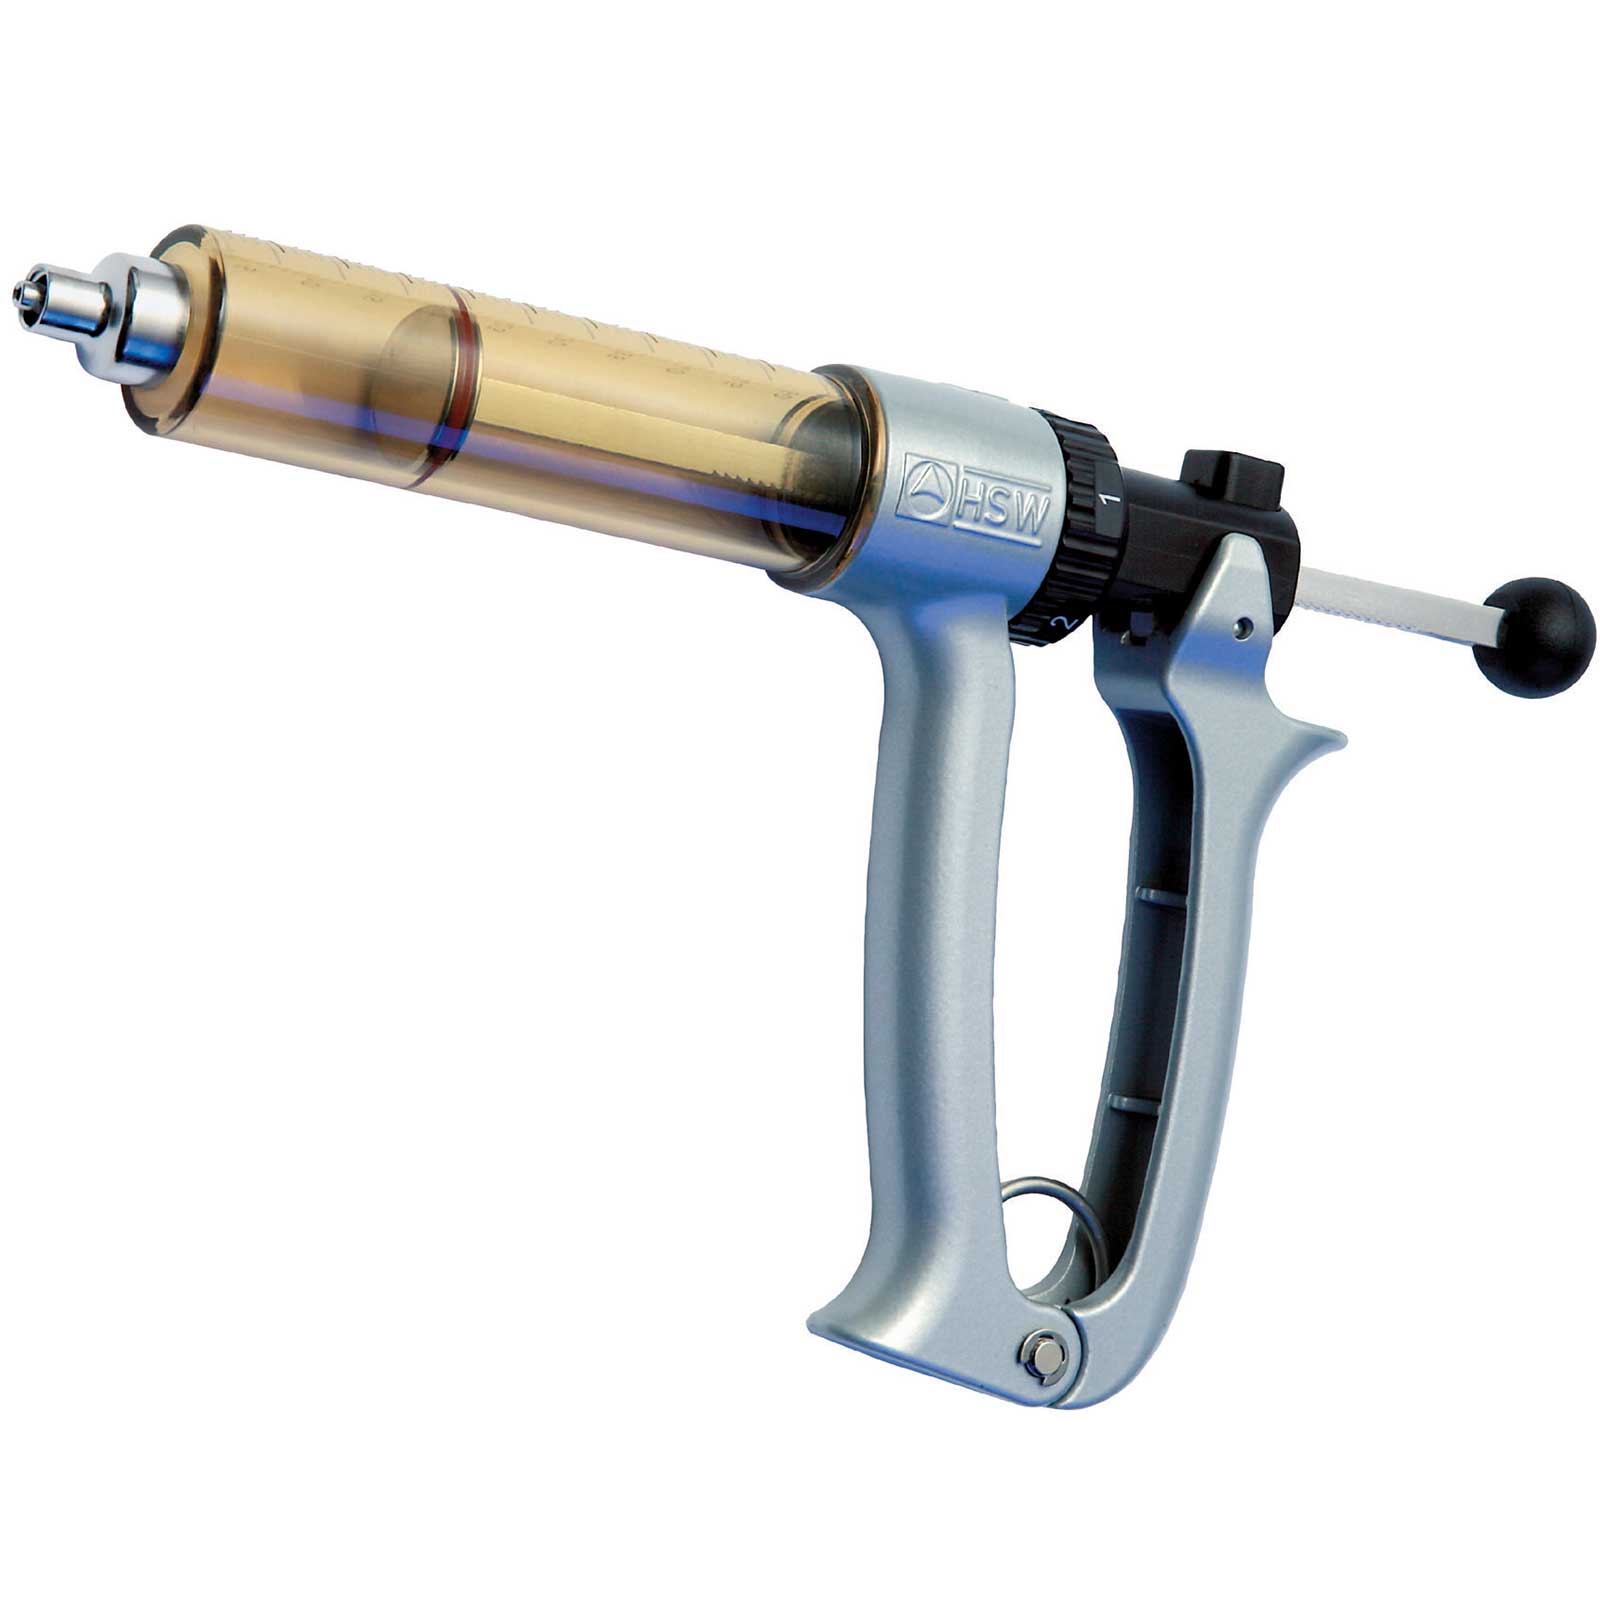 HSW MULTI-MATIC Injector 